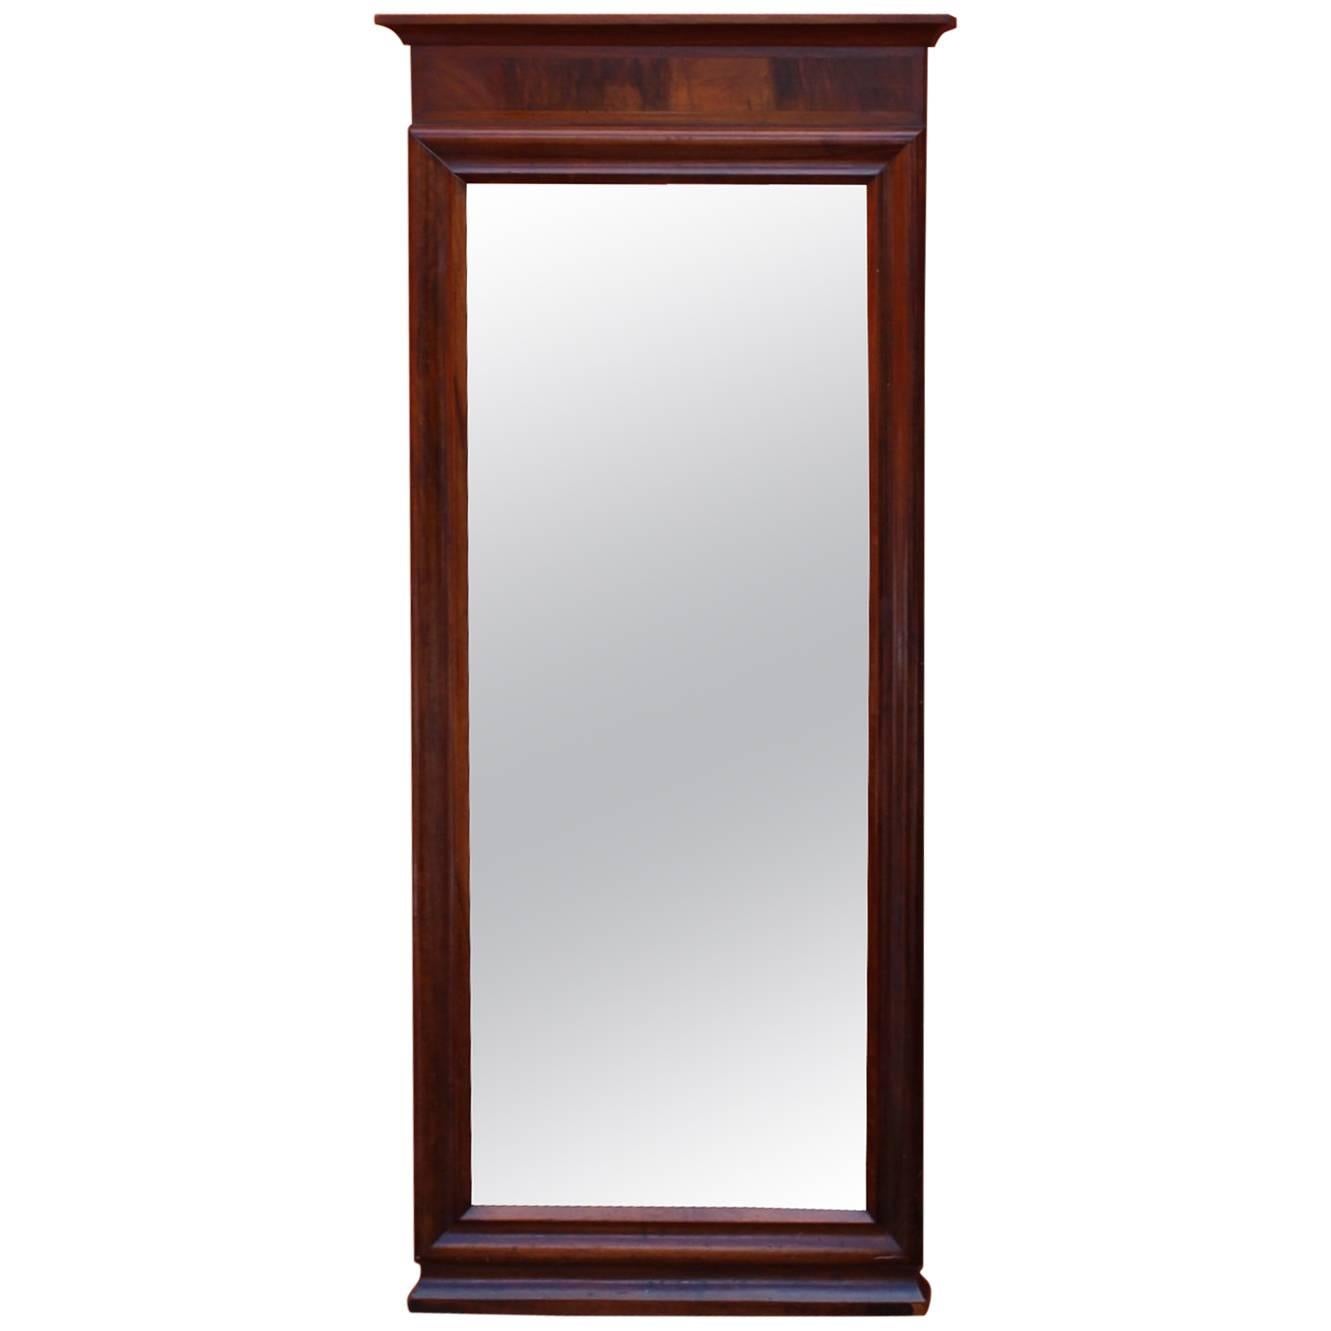 Christian the 8th Mirror in Mahogany from circa 1880s